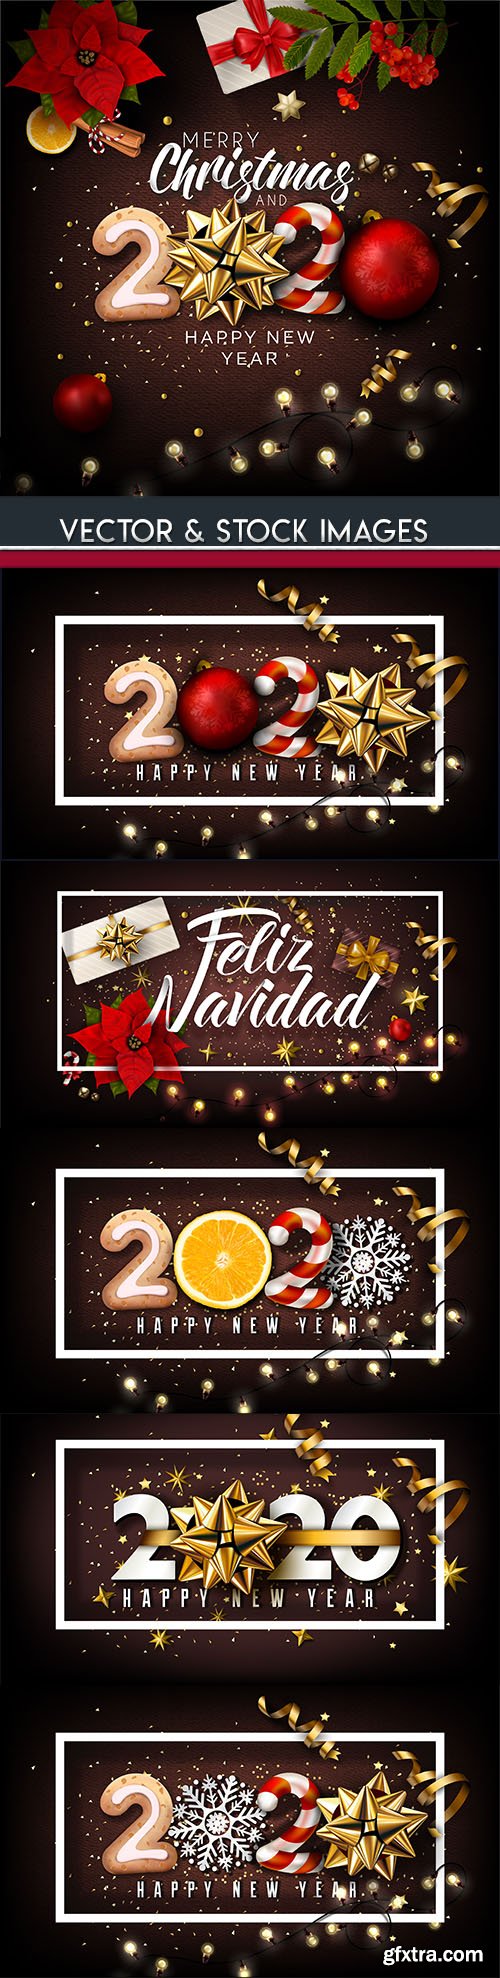 New Year and Christmas decorative 2020 illustration 13 